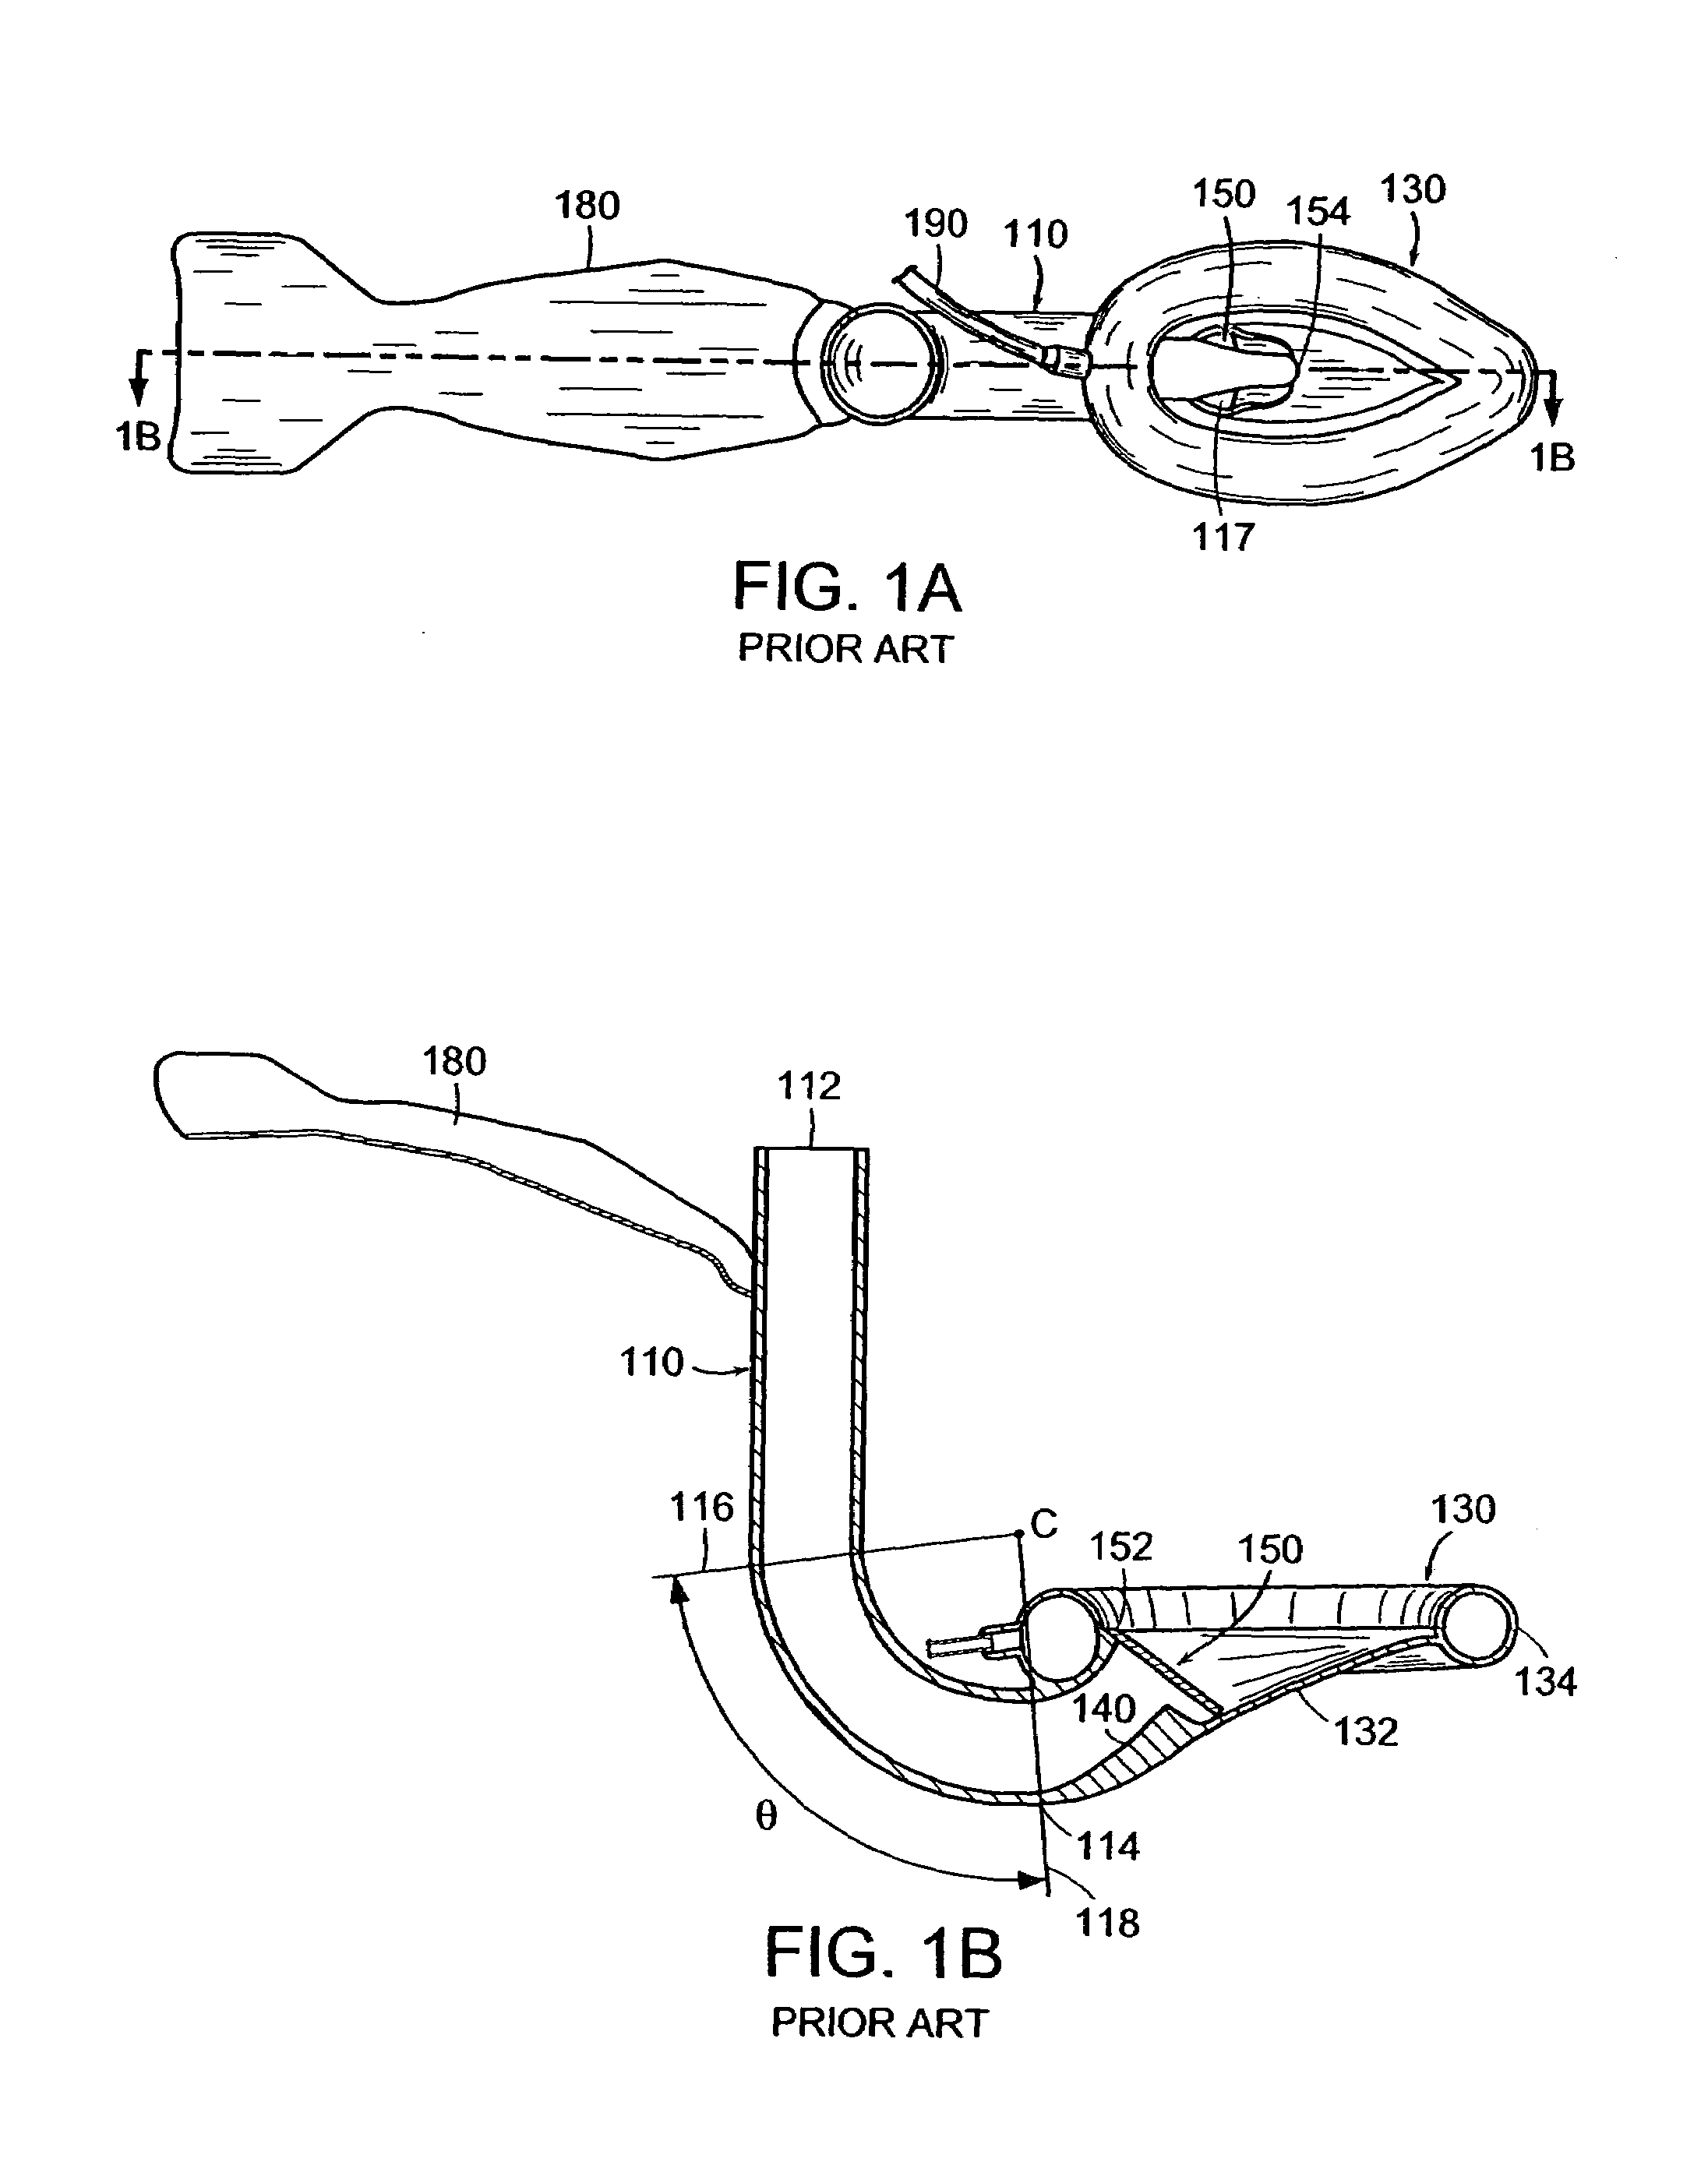 Intubating laryngeal mask airway device with fiber optic assembly